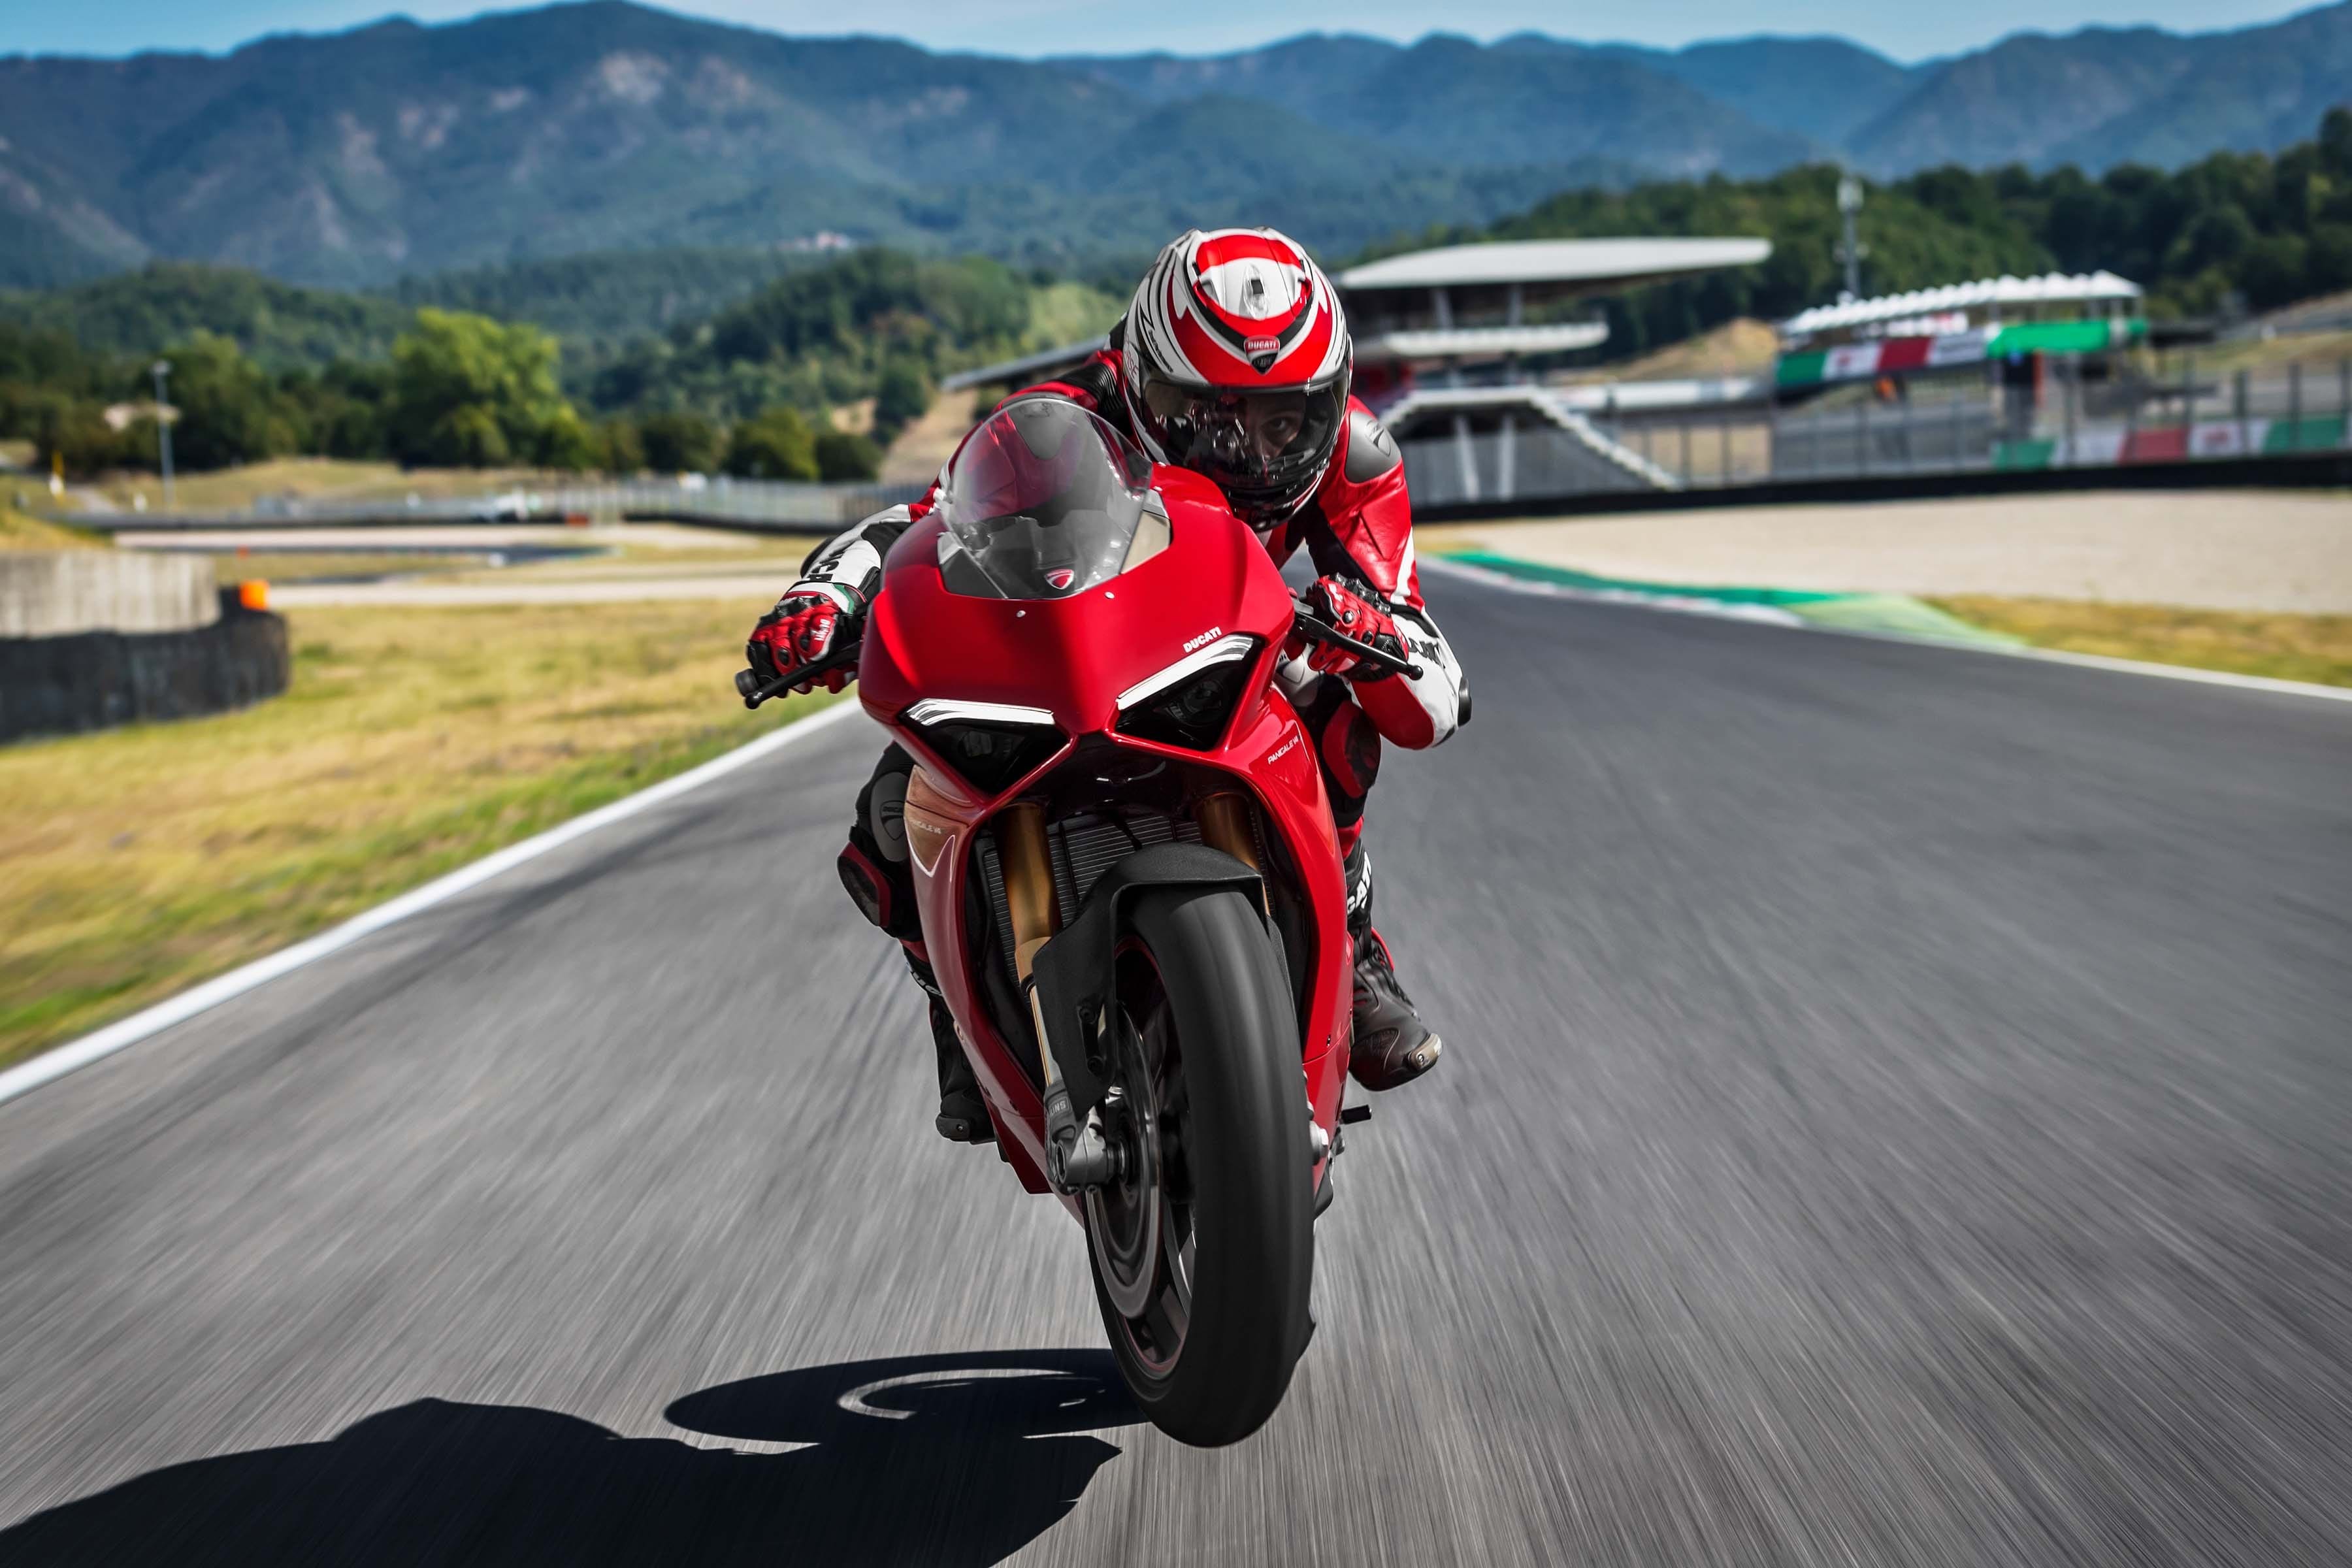 Ducati Panigale V4 2018 4k Wallpaper and Free Stock